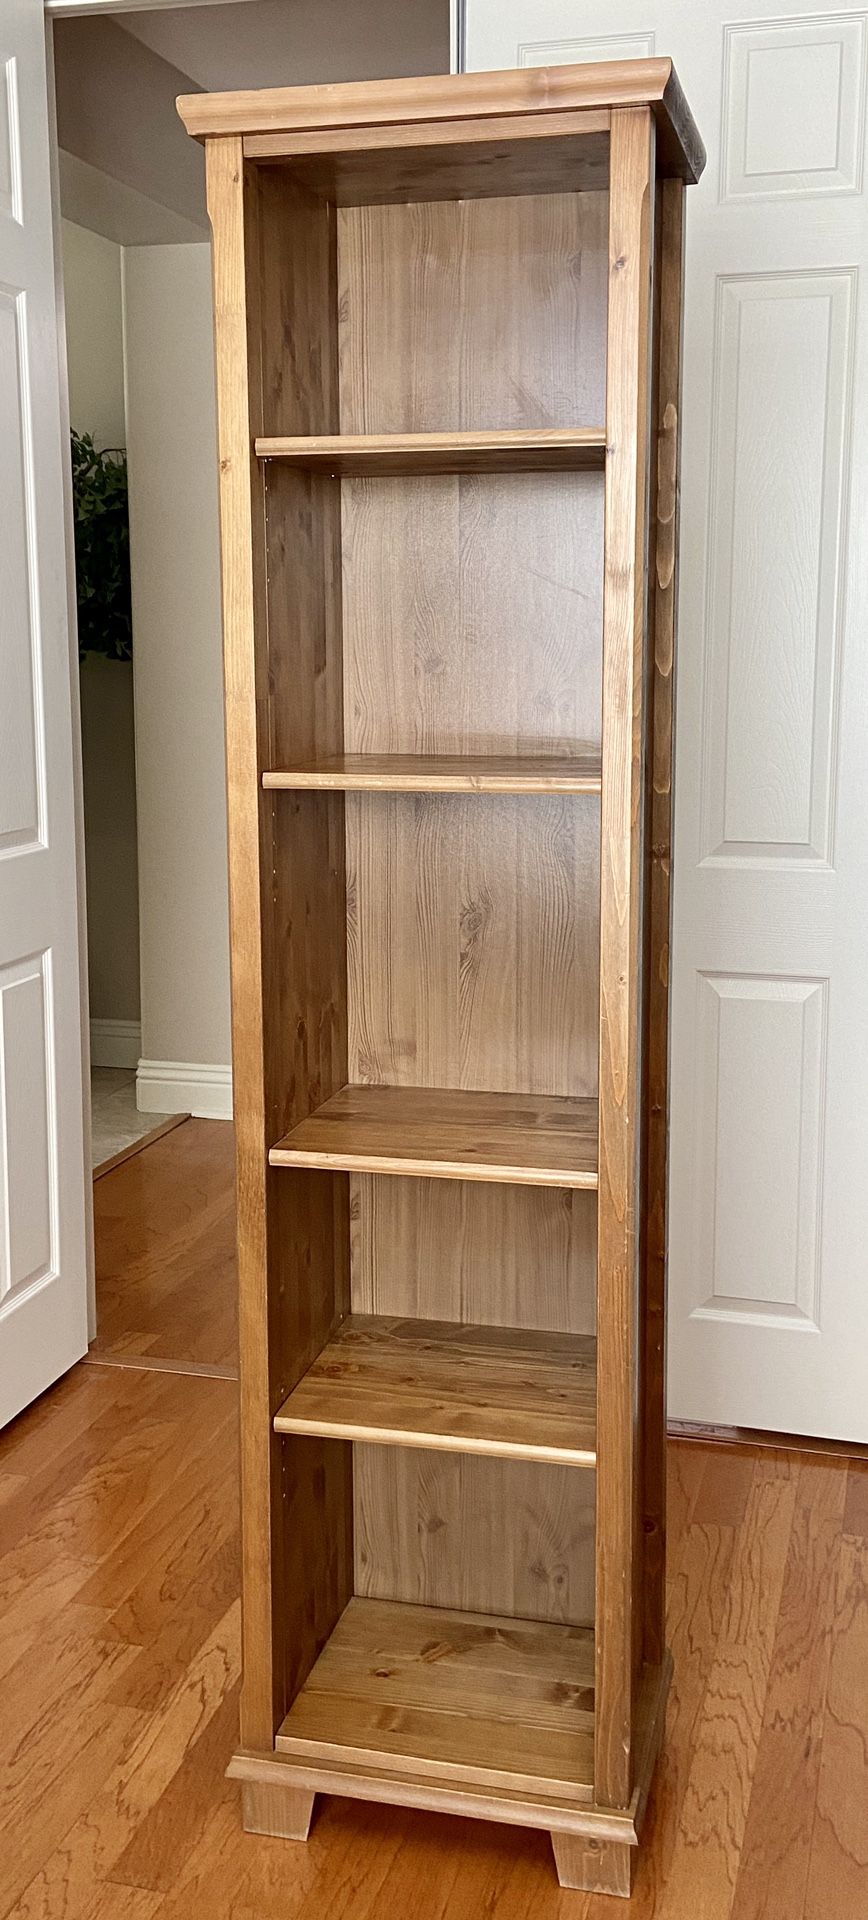 Bookcases / Media Cases - IKEA - 2 available